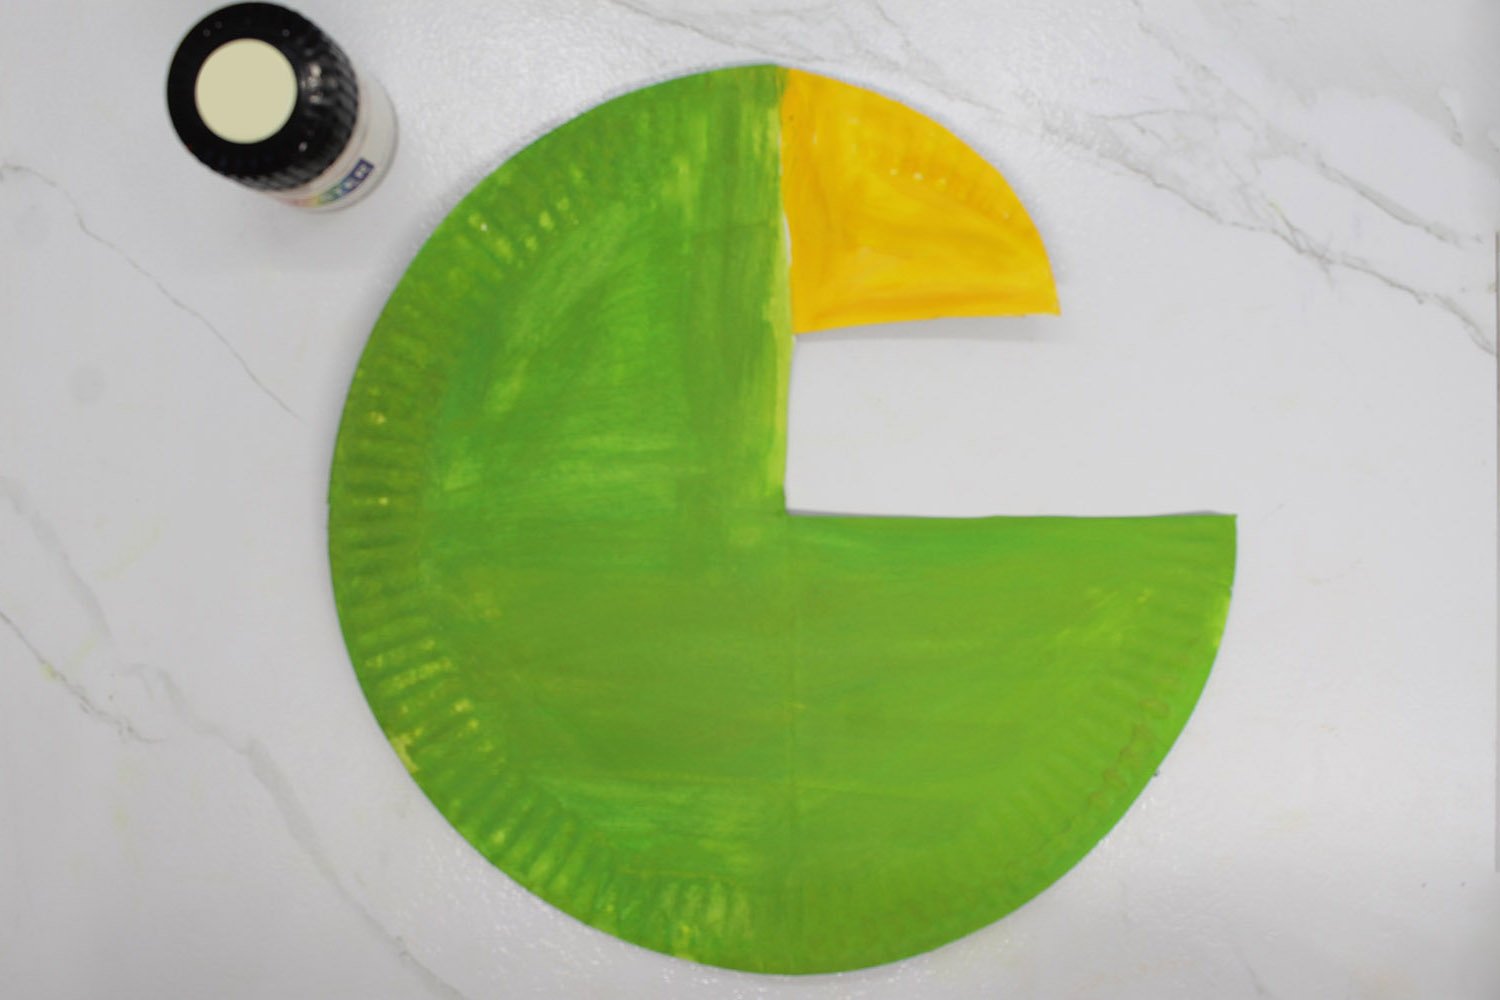 How to Make a Paper Plate Parrot - Step 08 (1)